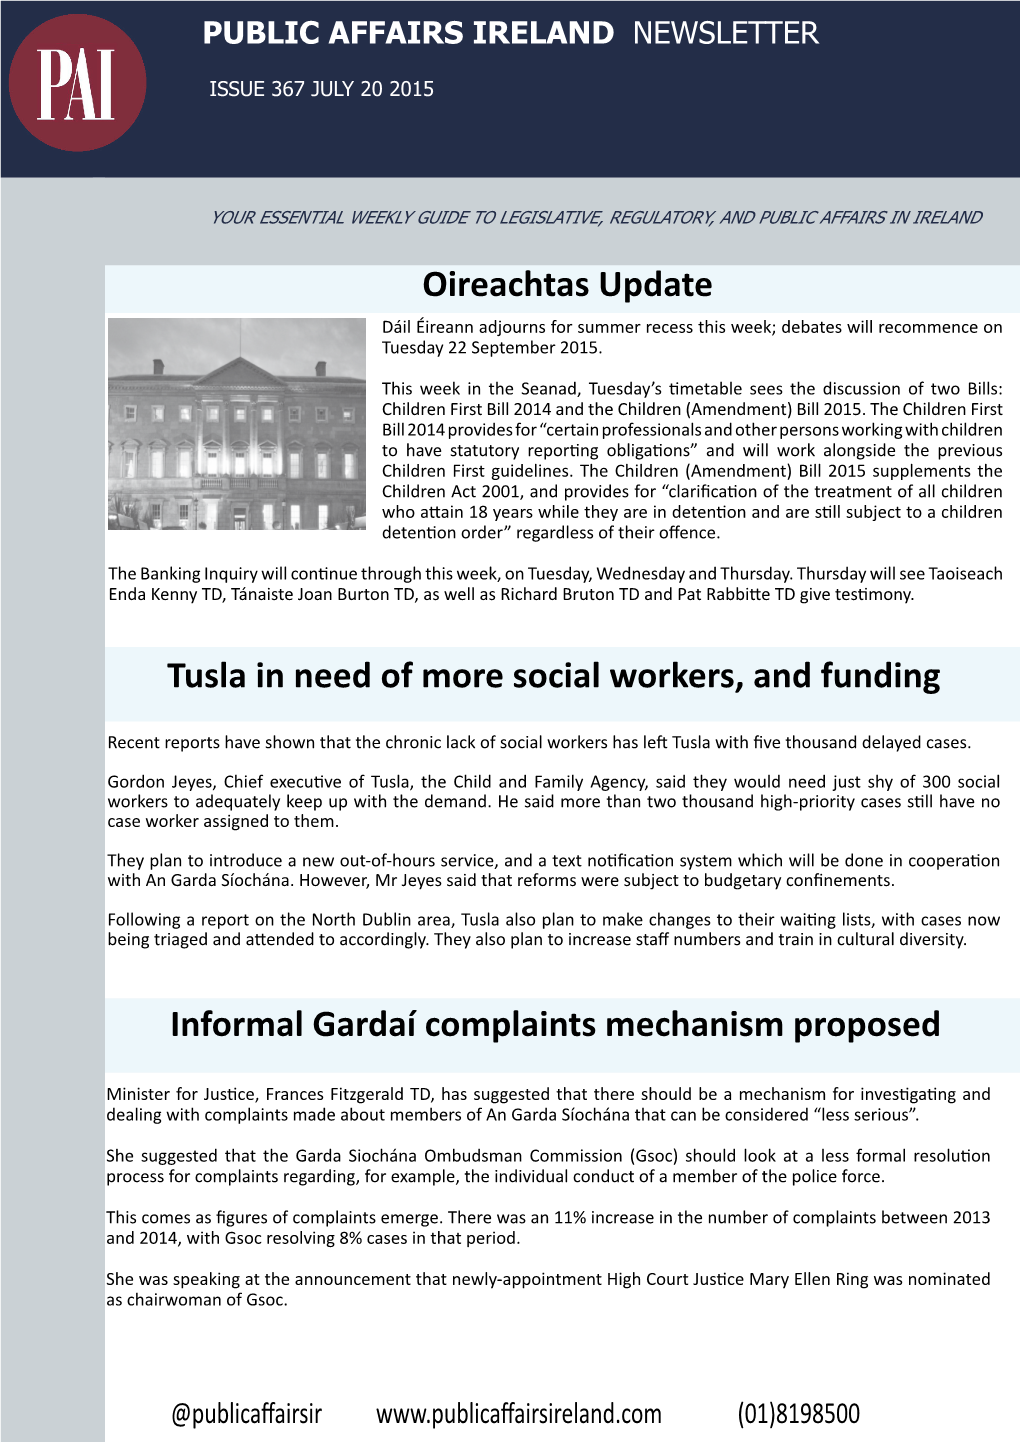 Tusla in Need of More Social Workers, and Funding Oireachtas Update